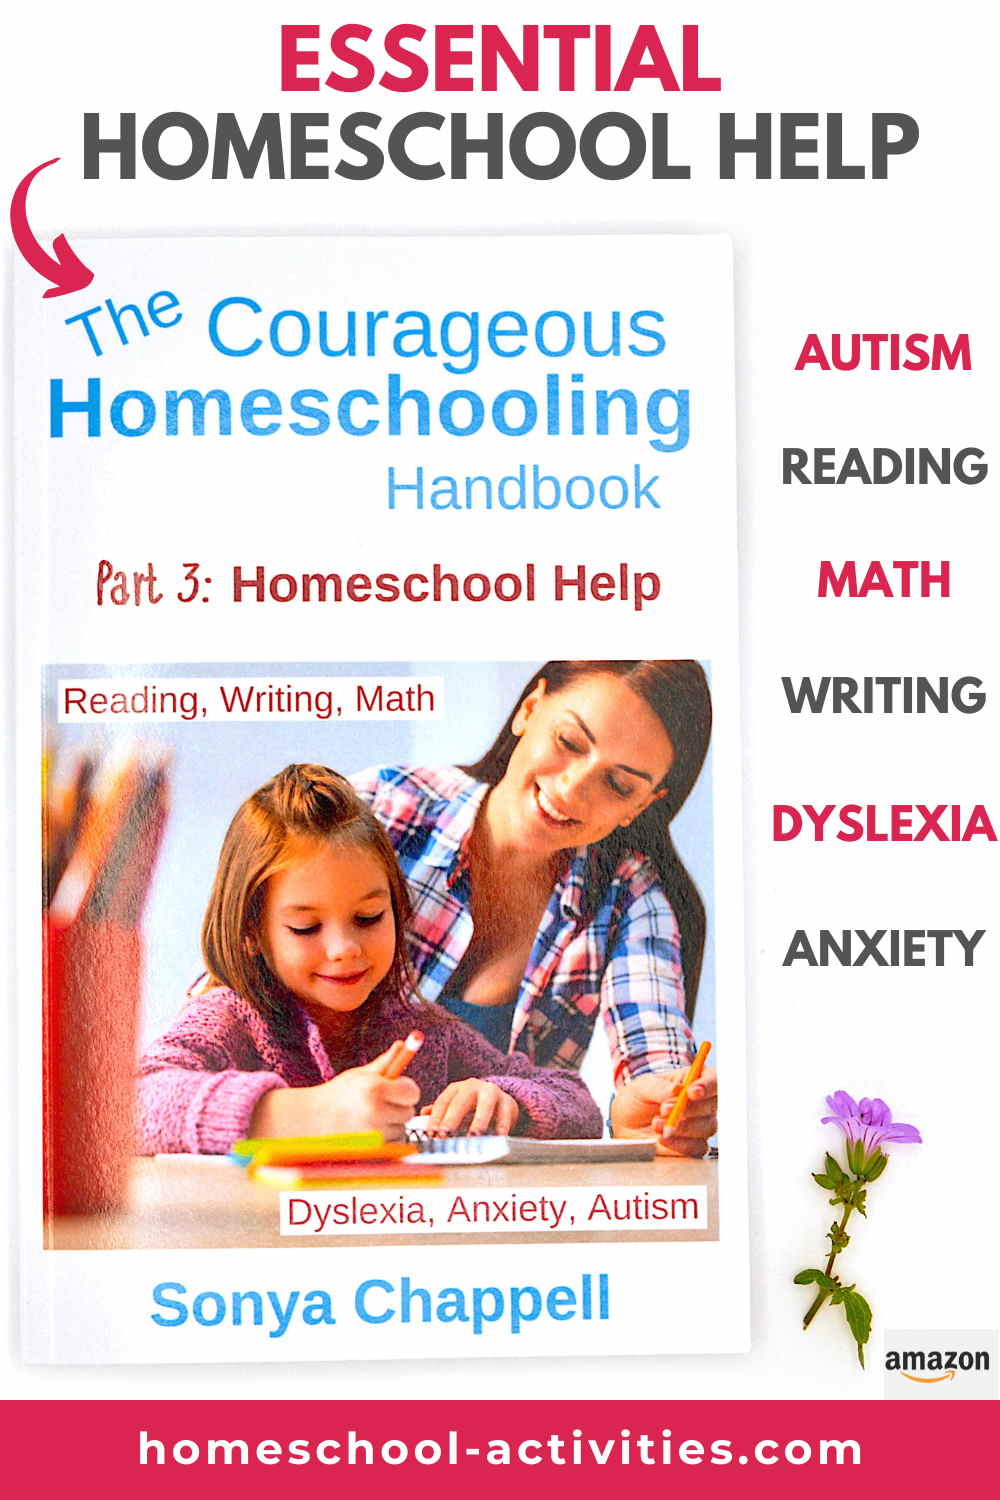 The Courageous Homeschooling Handbook: Homeschool Help with reading, writing, math, dyslexia, anxiety and autism.